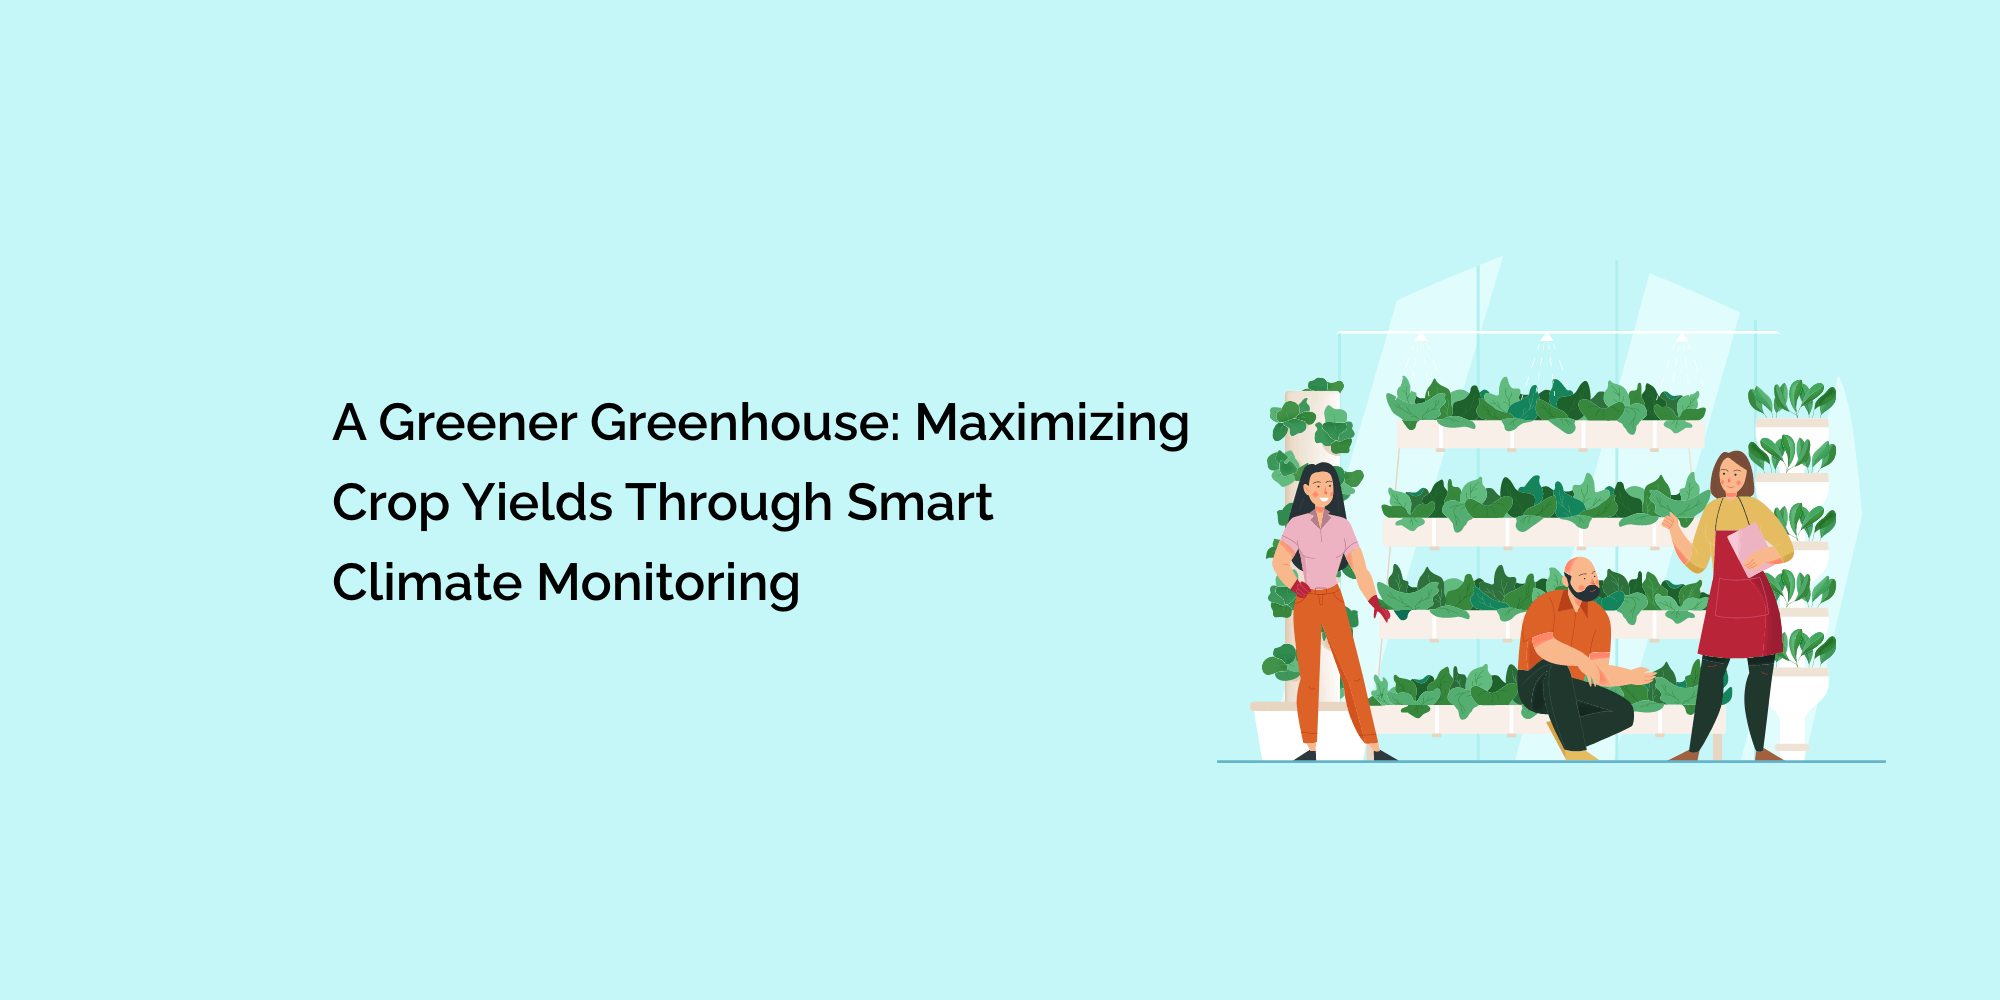 A Greener Greenhouse: Maximizing Crop Yields Through Smart Climate Monitoring